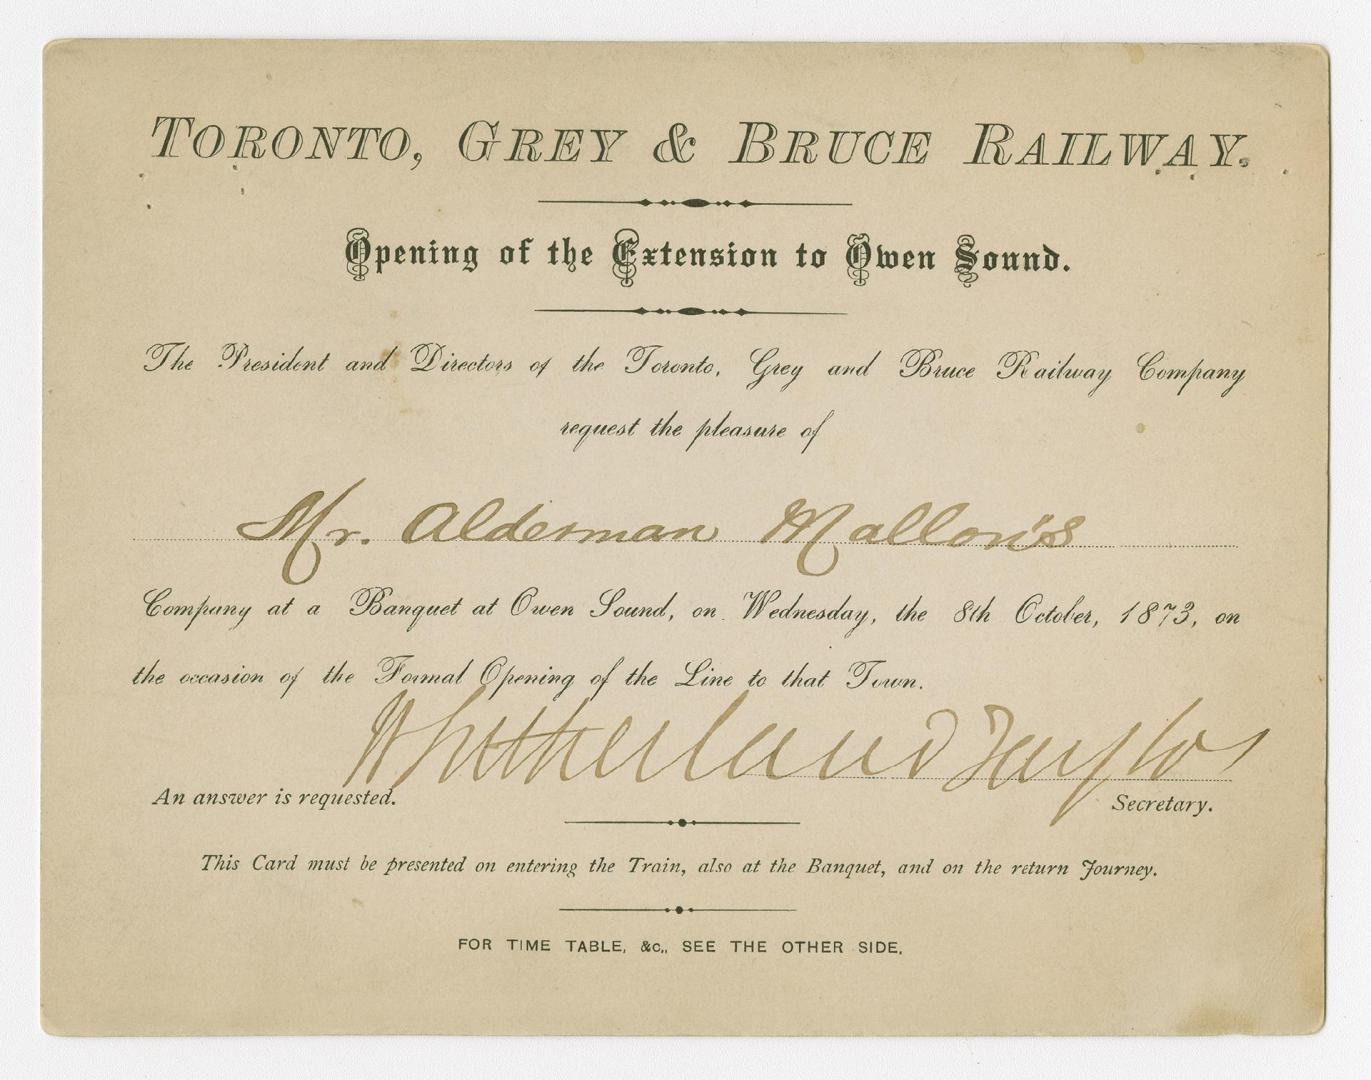 Toronto, Grey & Bruce Railway opening of the extension to Owen Sound